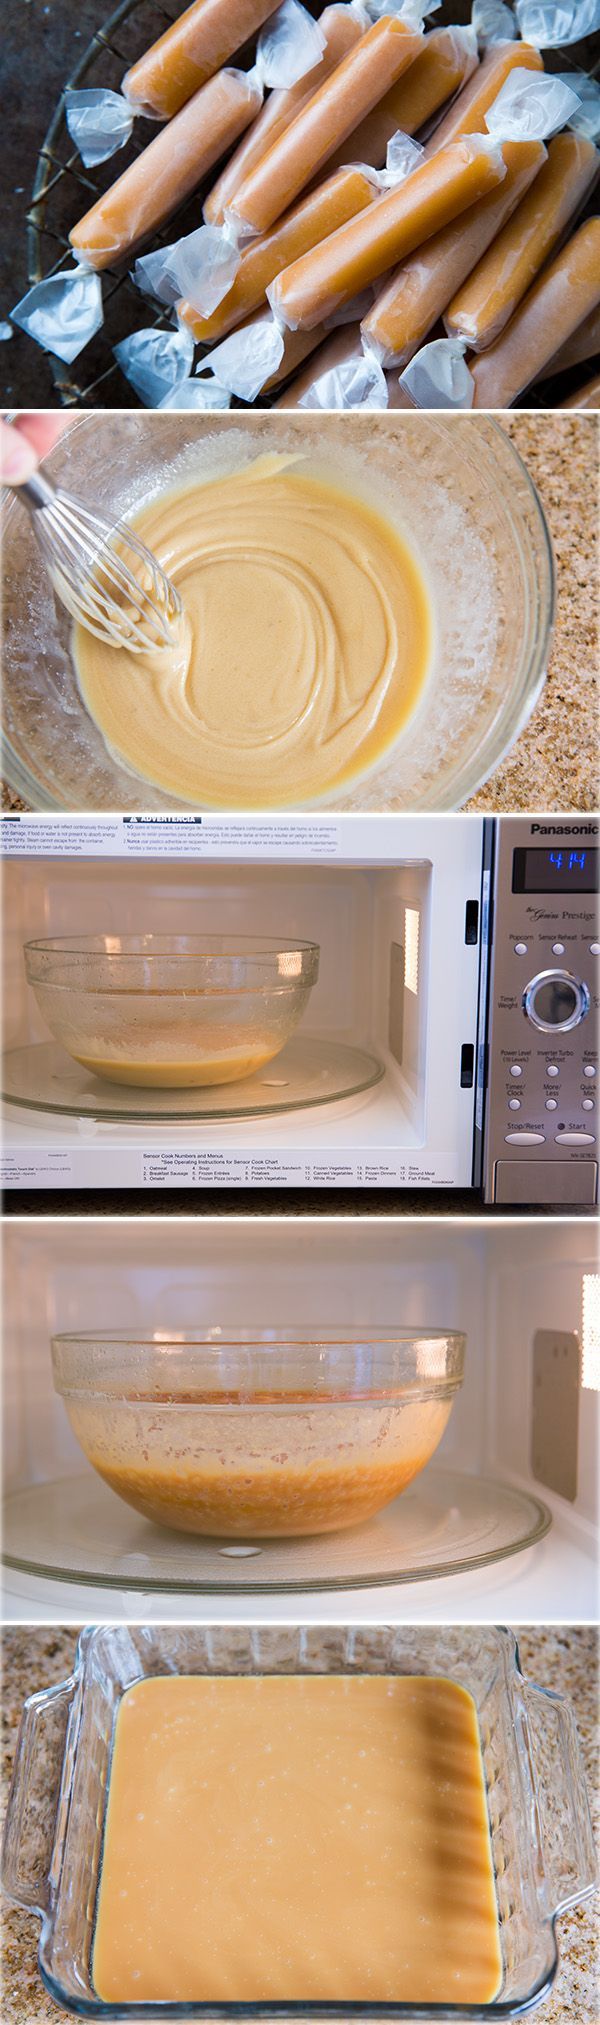 Microwave Caramels – This i